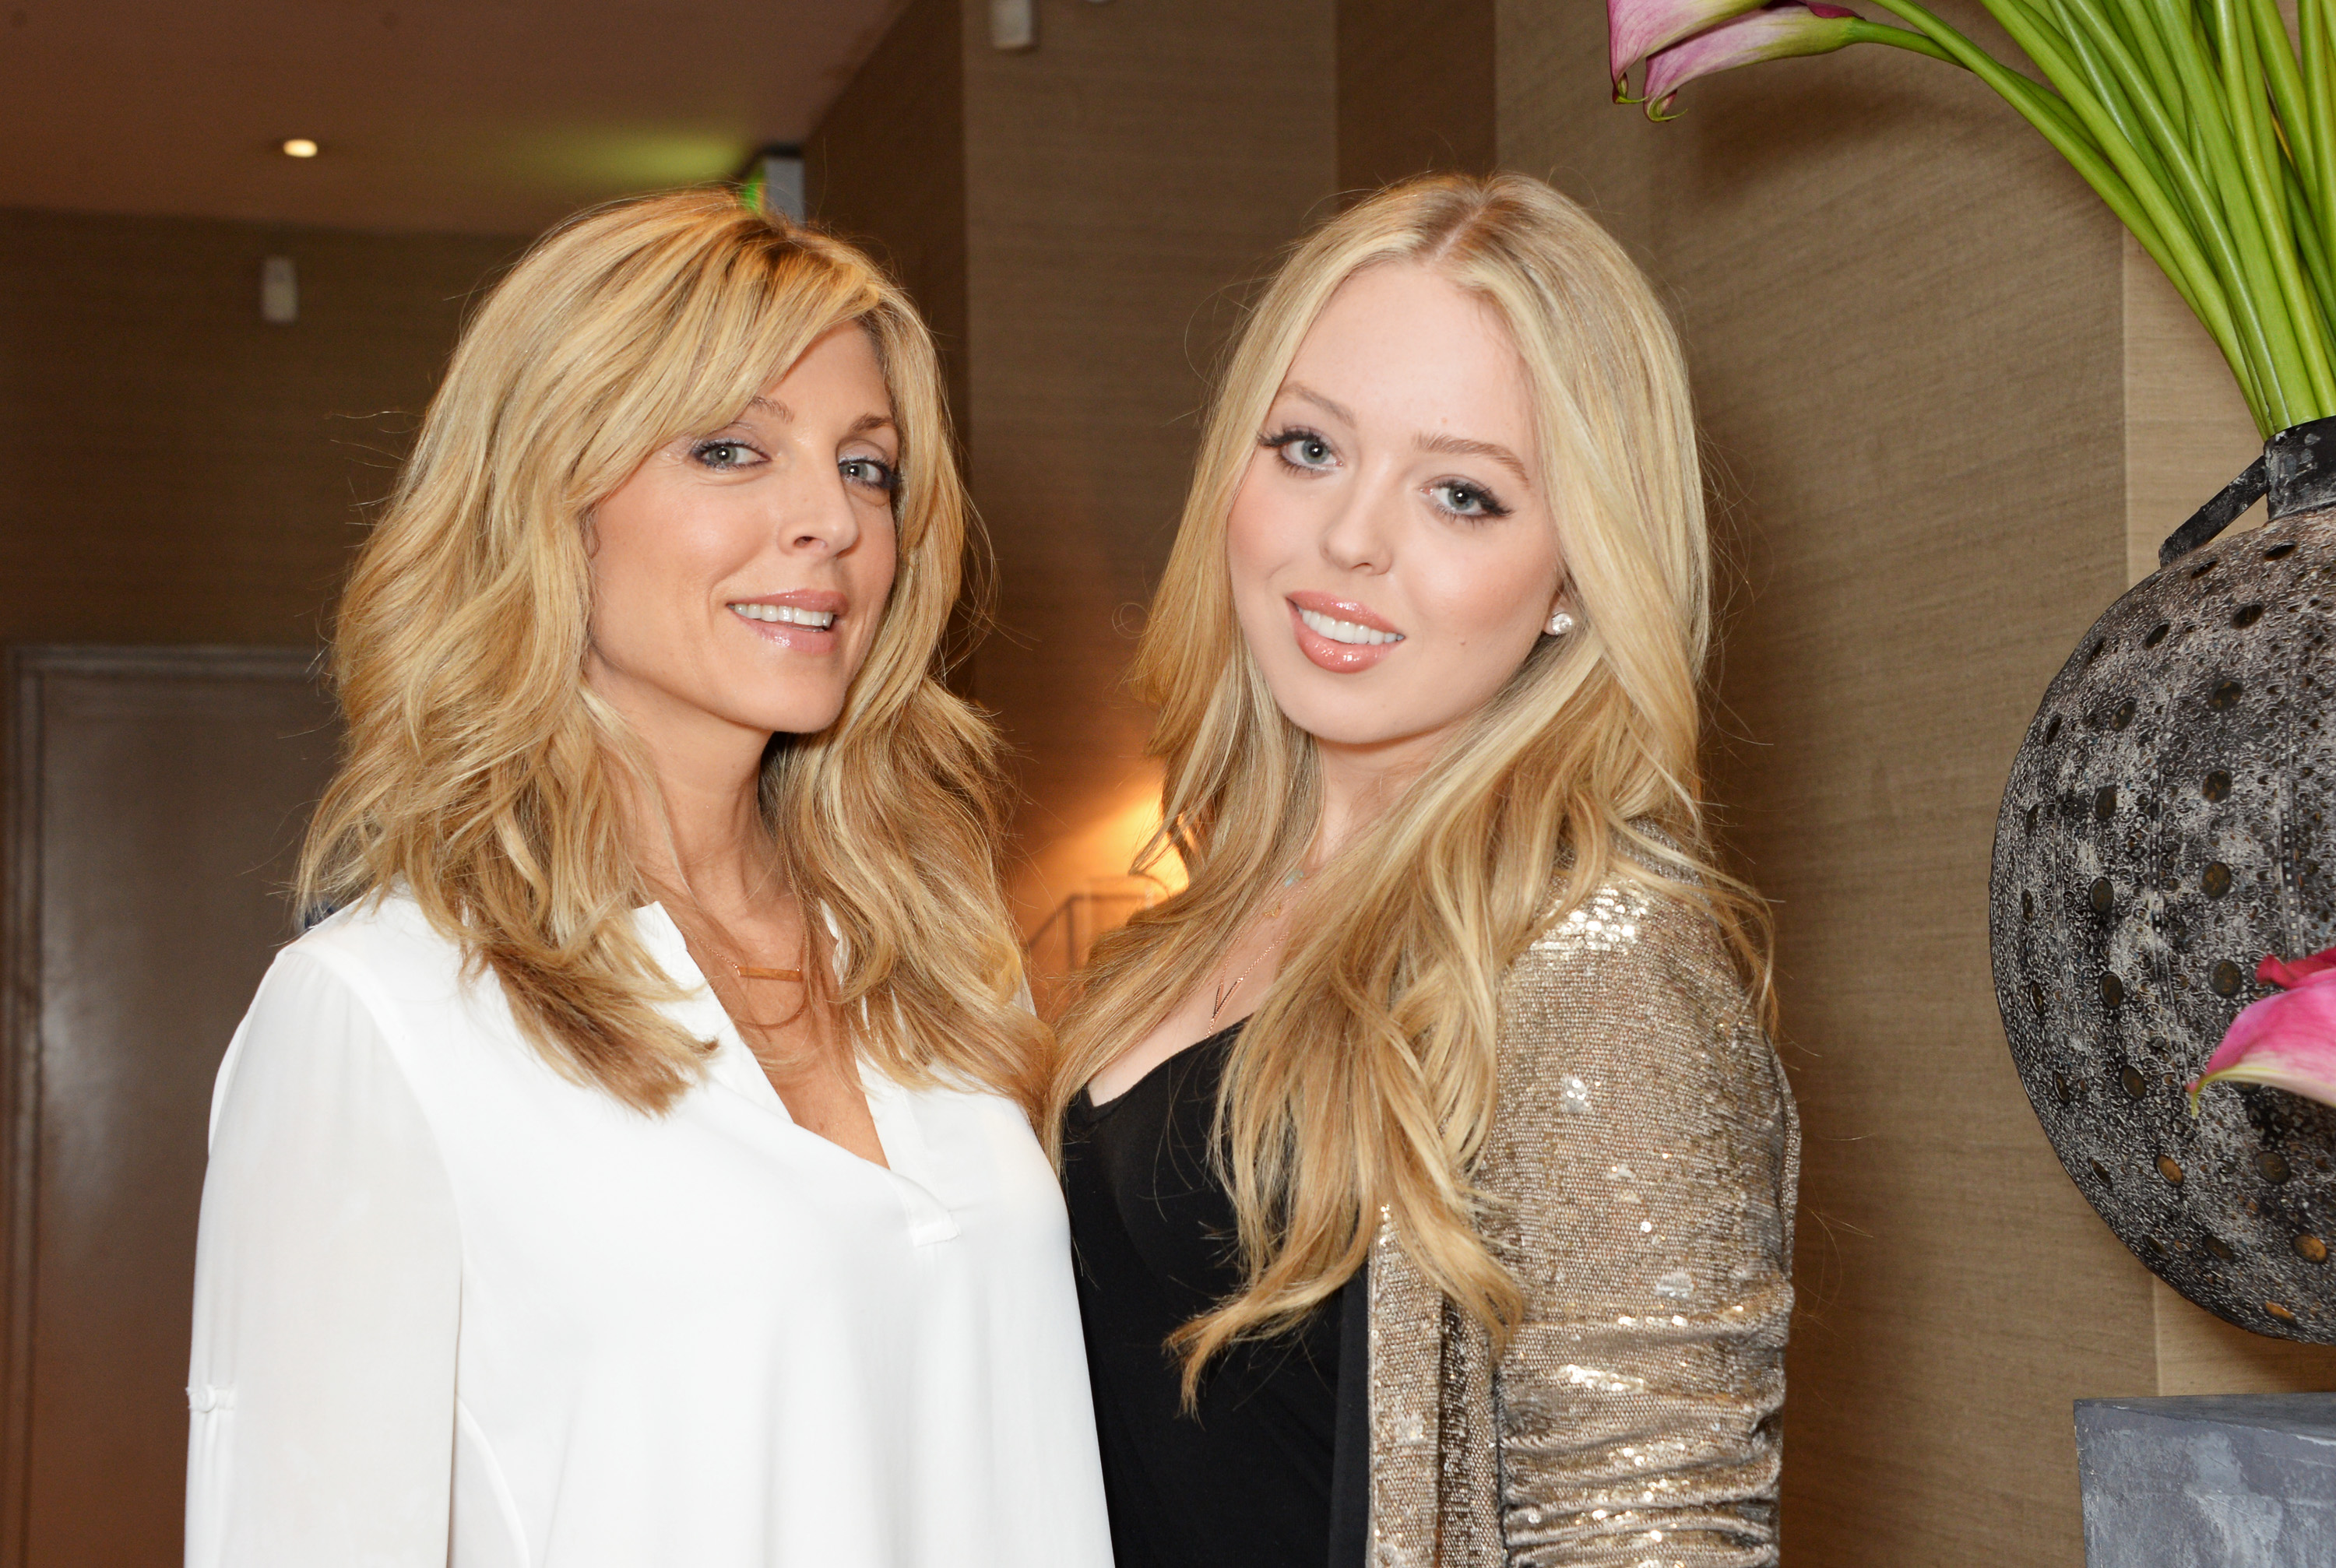 LONDON, ENGLAND - JULY 28:  Marla Maples (L) and Tiffany Trump have dinner at Sumosan on July 28, 2014 in London, England.  (Photo by David M. Benett/Getty Images) (David M. Benett—Getty Images)